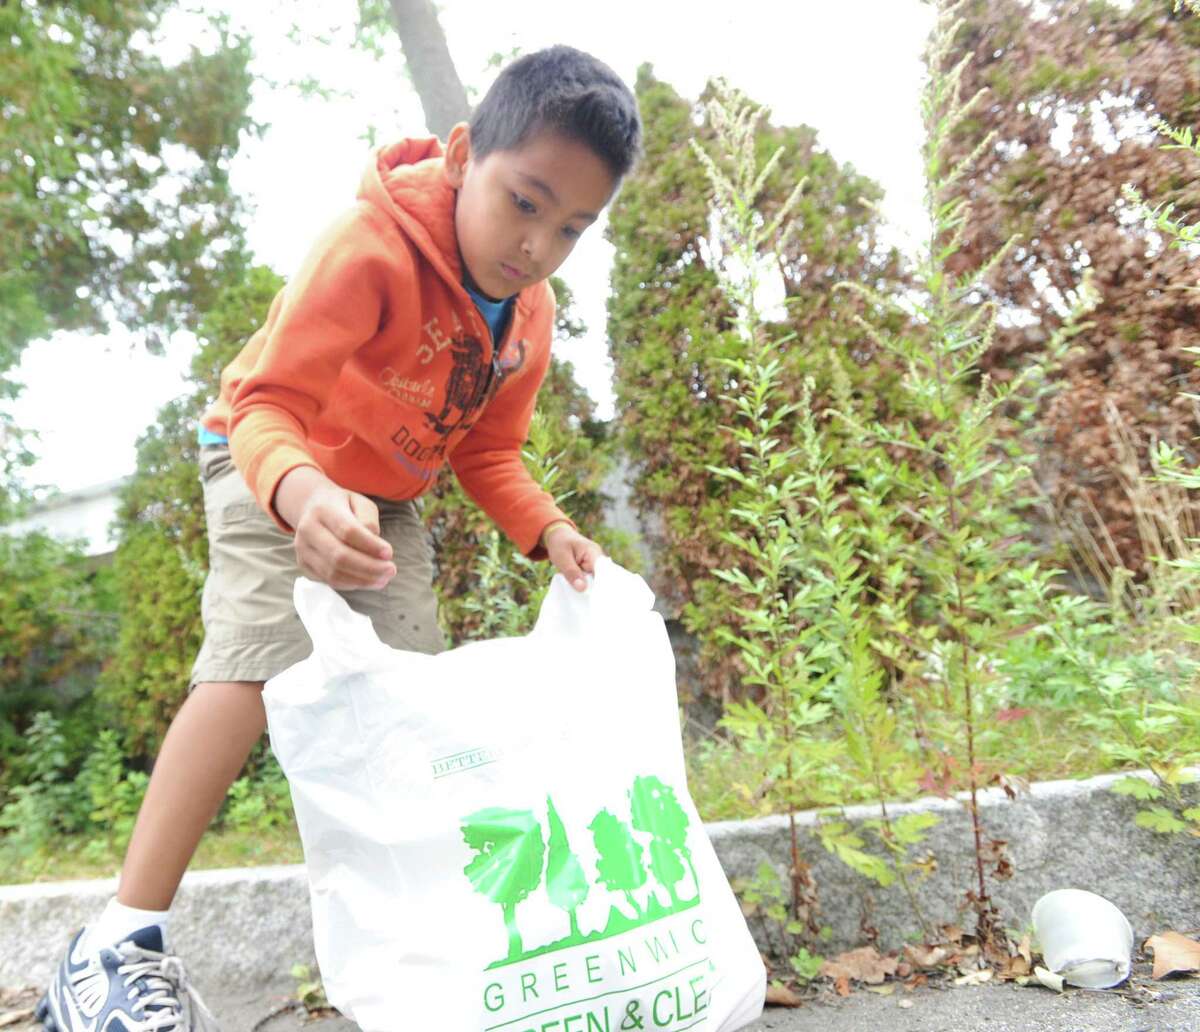 One thing will be different this year for the townwide fall cleanup by Greenwich Clean & Green: No plastic bags! Volunteers will fan out throughout town from 8 a.m. to noon Saturday to pick up trash. Everyone is invited to participate. Trash drop-off points will be set up at the firehouses in Byram, Glenville, Cos Cob and Old Greenwich, with another at Greenwich Point. Also at those locations, Greenwich Green & Clean will provide work supplies as well as refreshments. For more information, visit www.greenwichgreenandclean.org/.